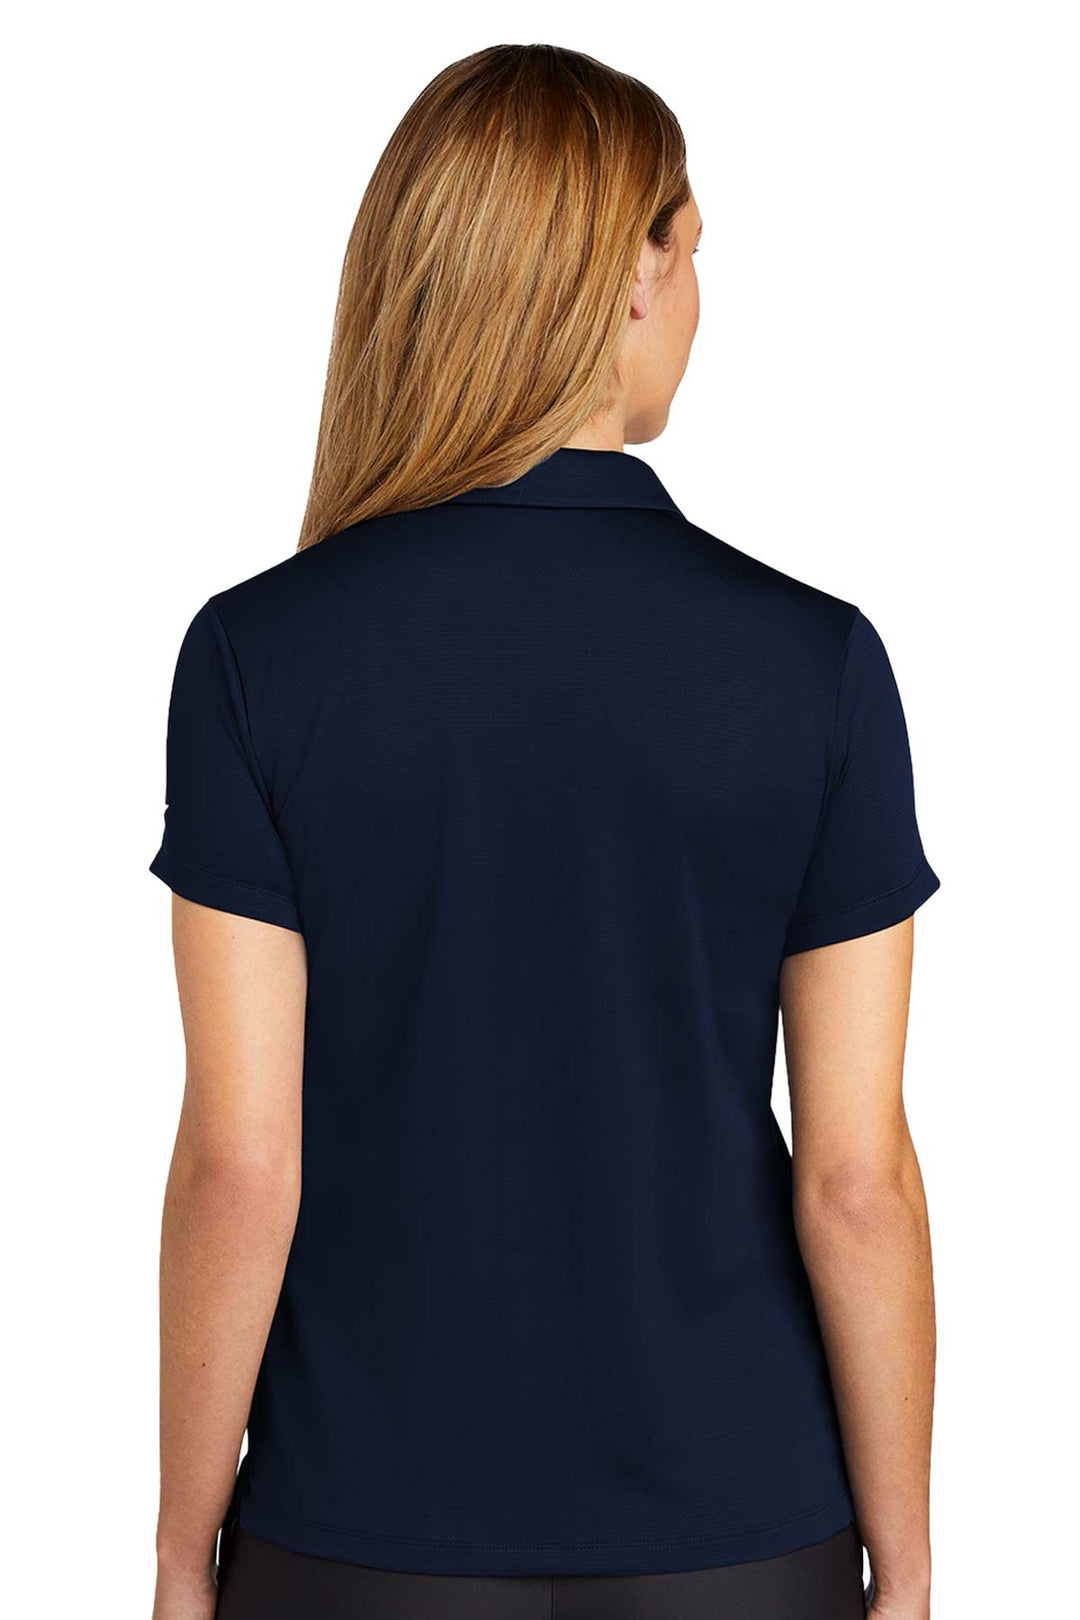 Ladies Dry Essential Solid Polo